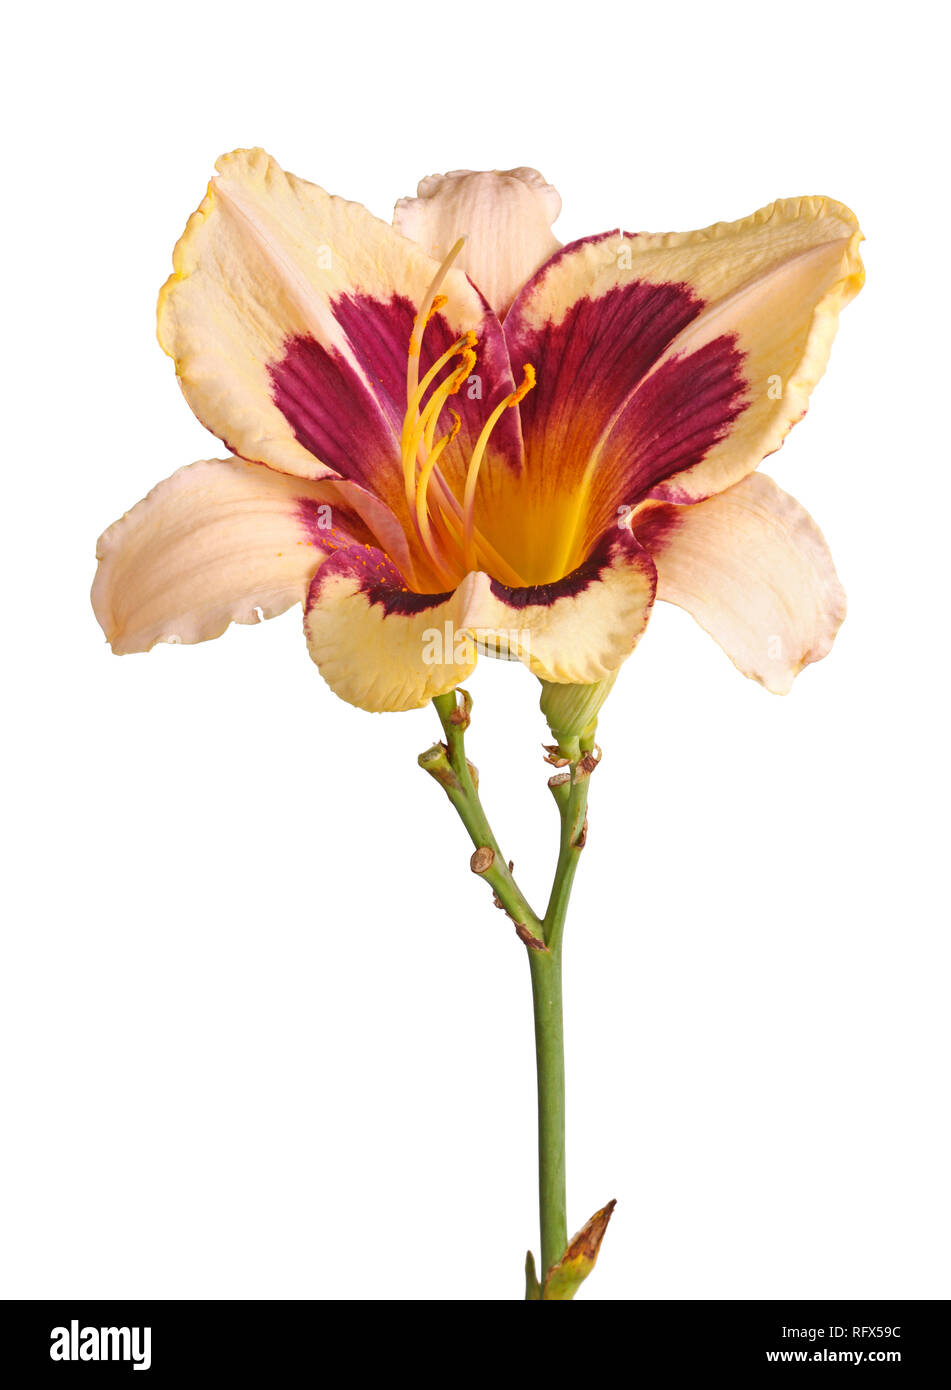 Single stem with a misformed cream and maroon daylily flower (Hemerocallis hybrid) isolated against a white background Stock Photo